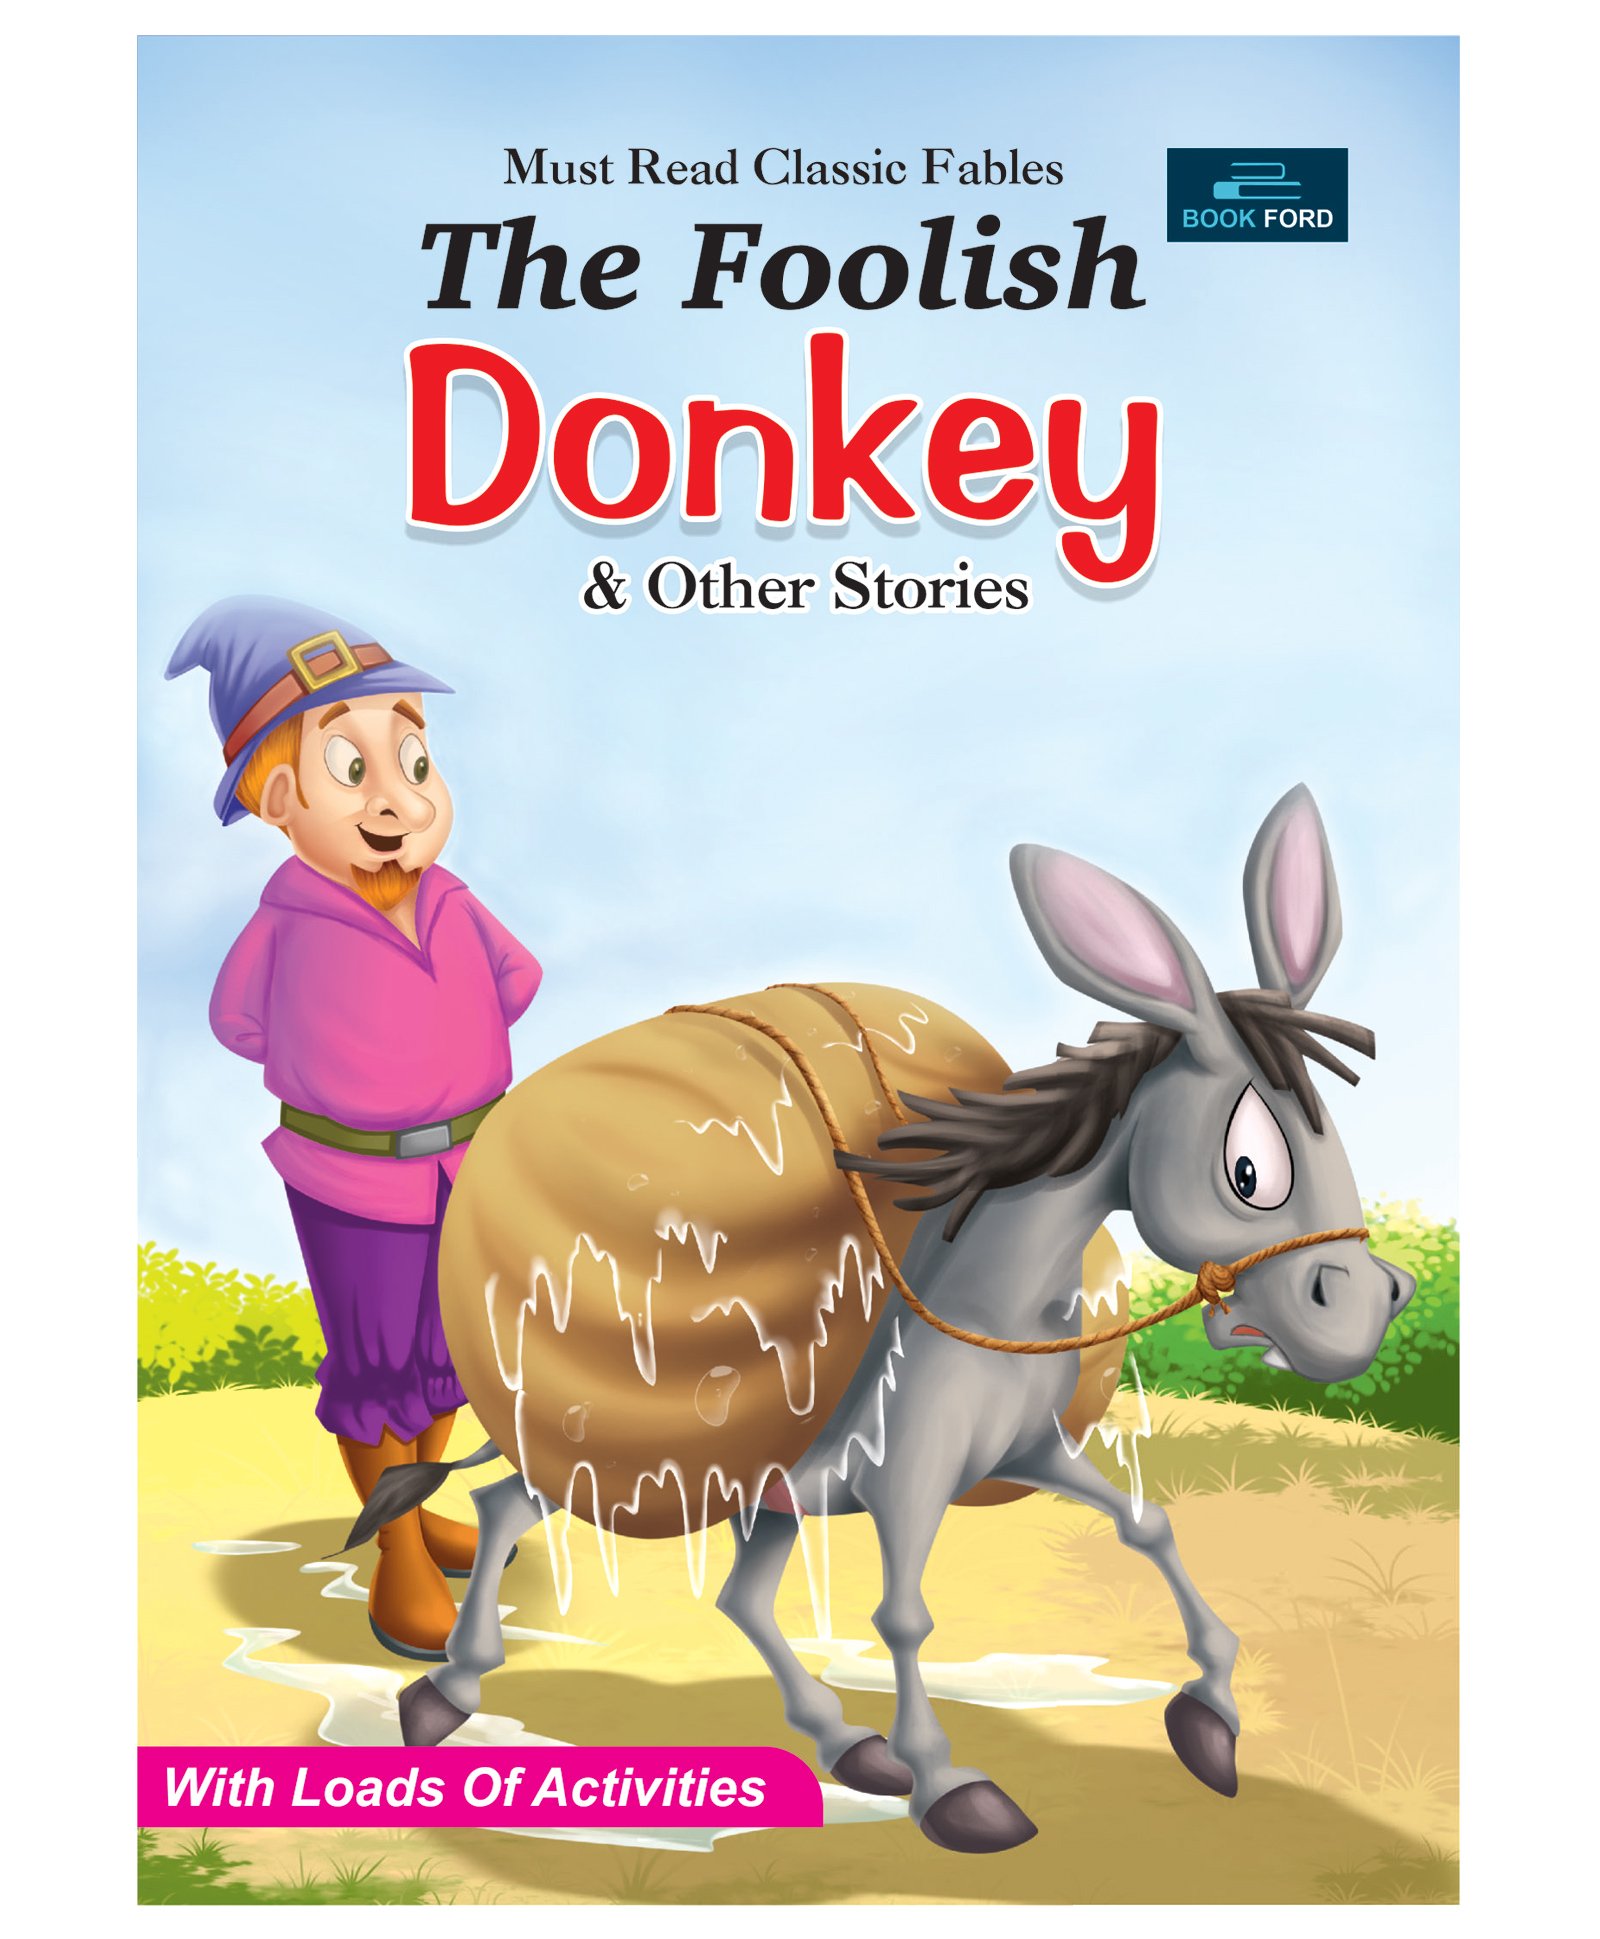 Pocket Book The Foolish Donkey English Online In India Buy At Best Price From Firstcry Com